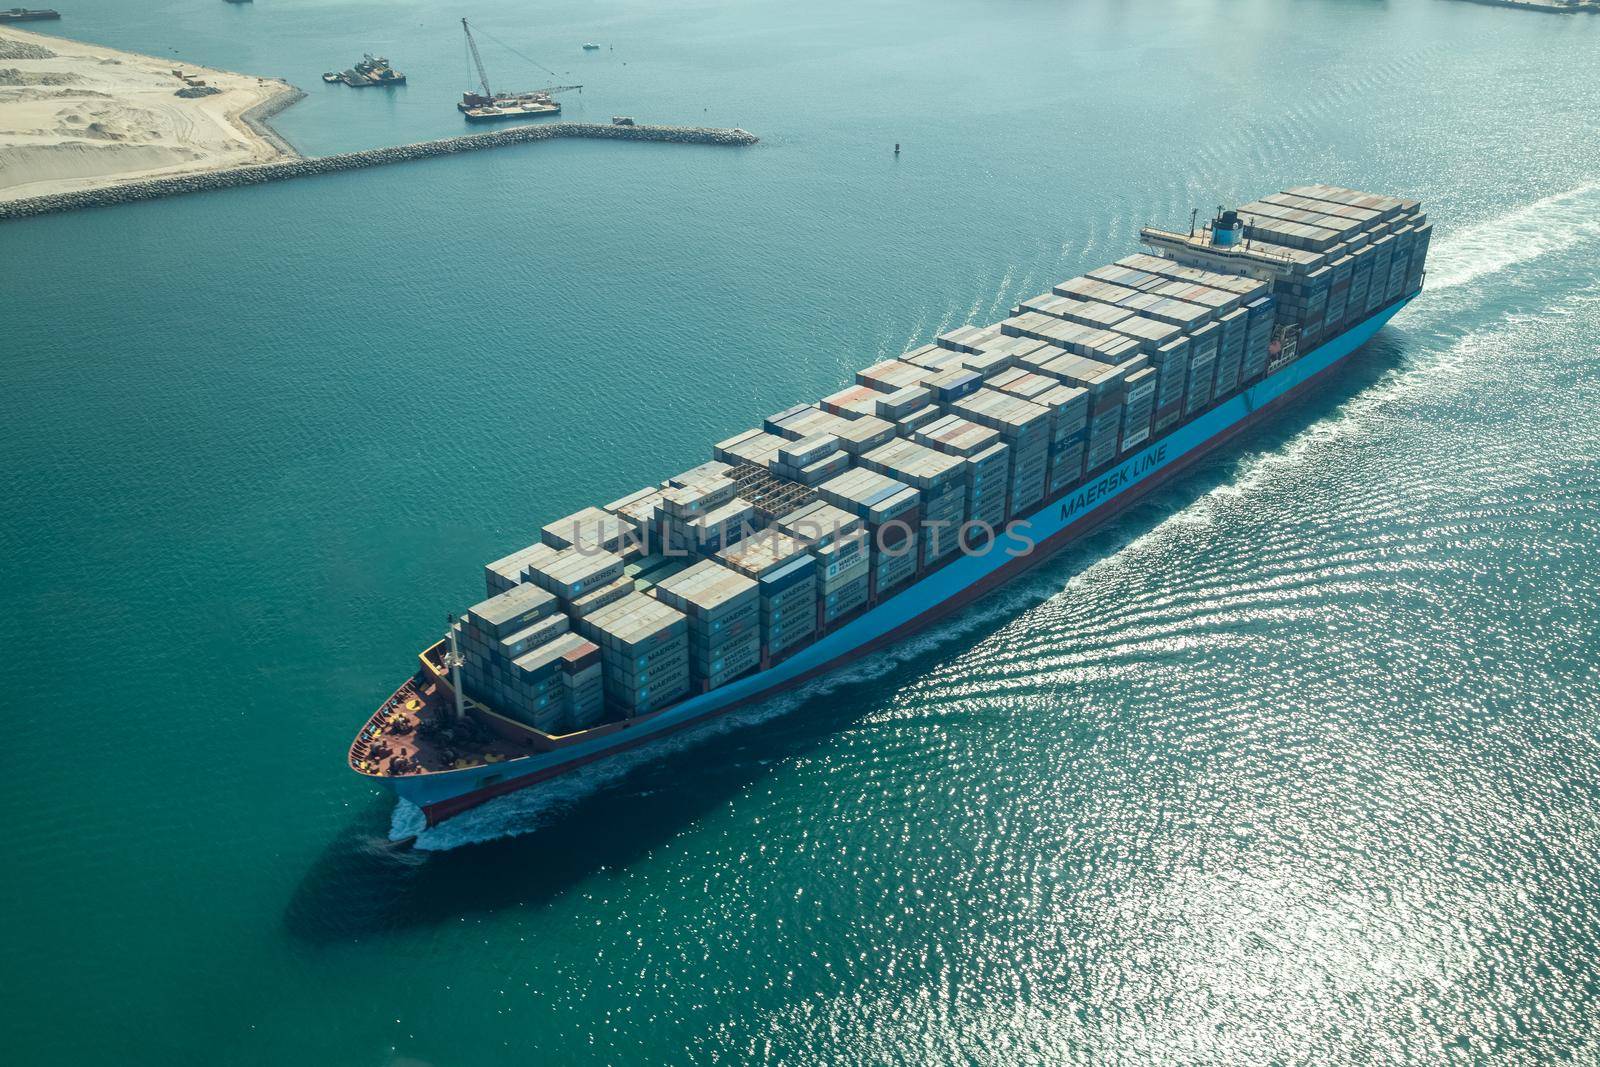 Dubai, United Arab Emirates - October 17, 2014: Aerial view of a cargo container ship leaving the harbor